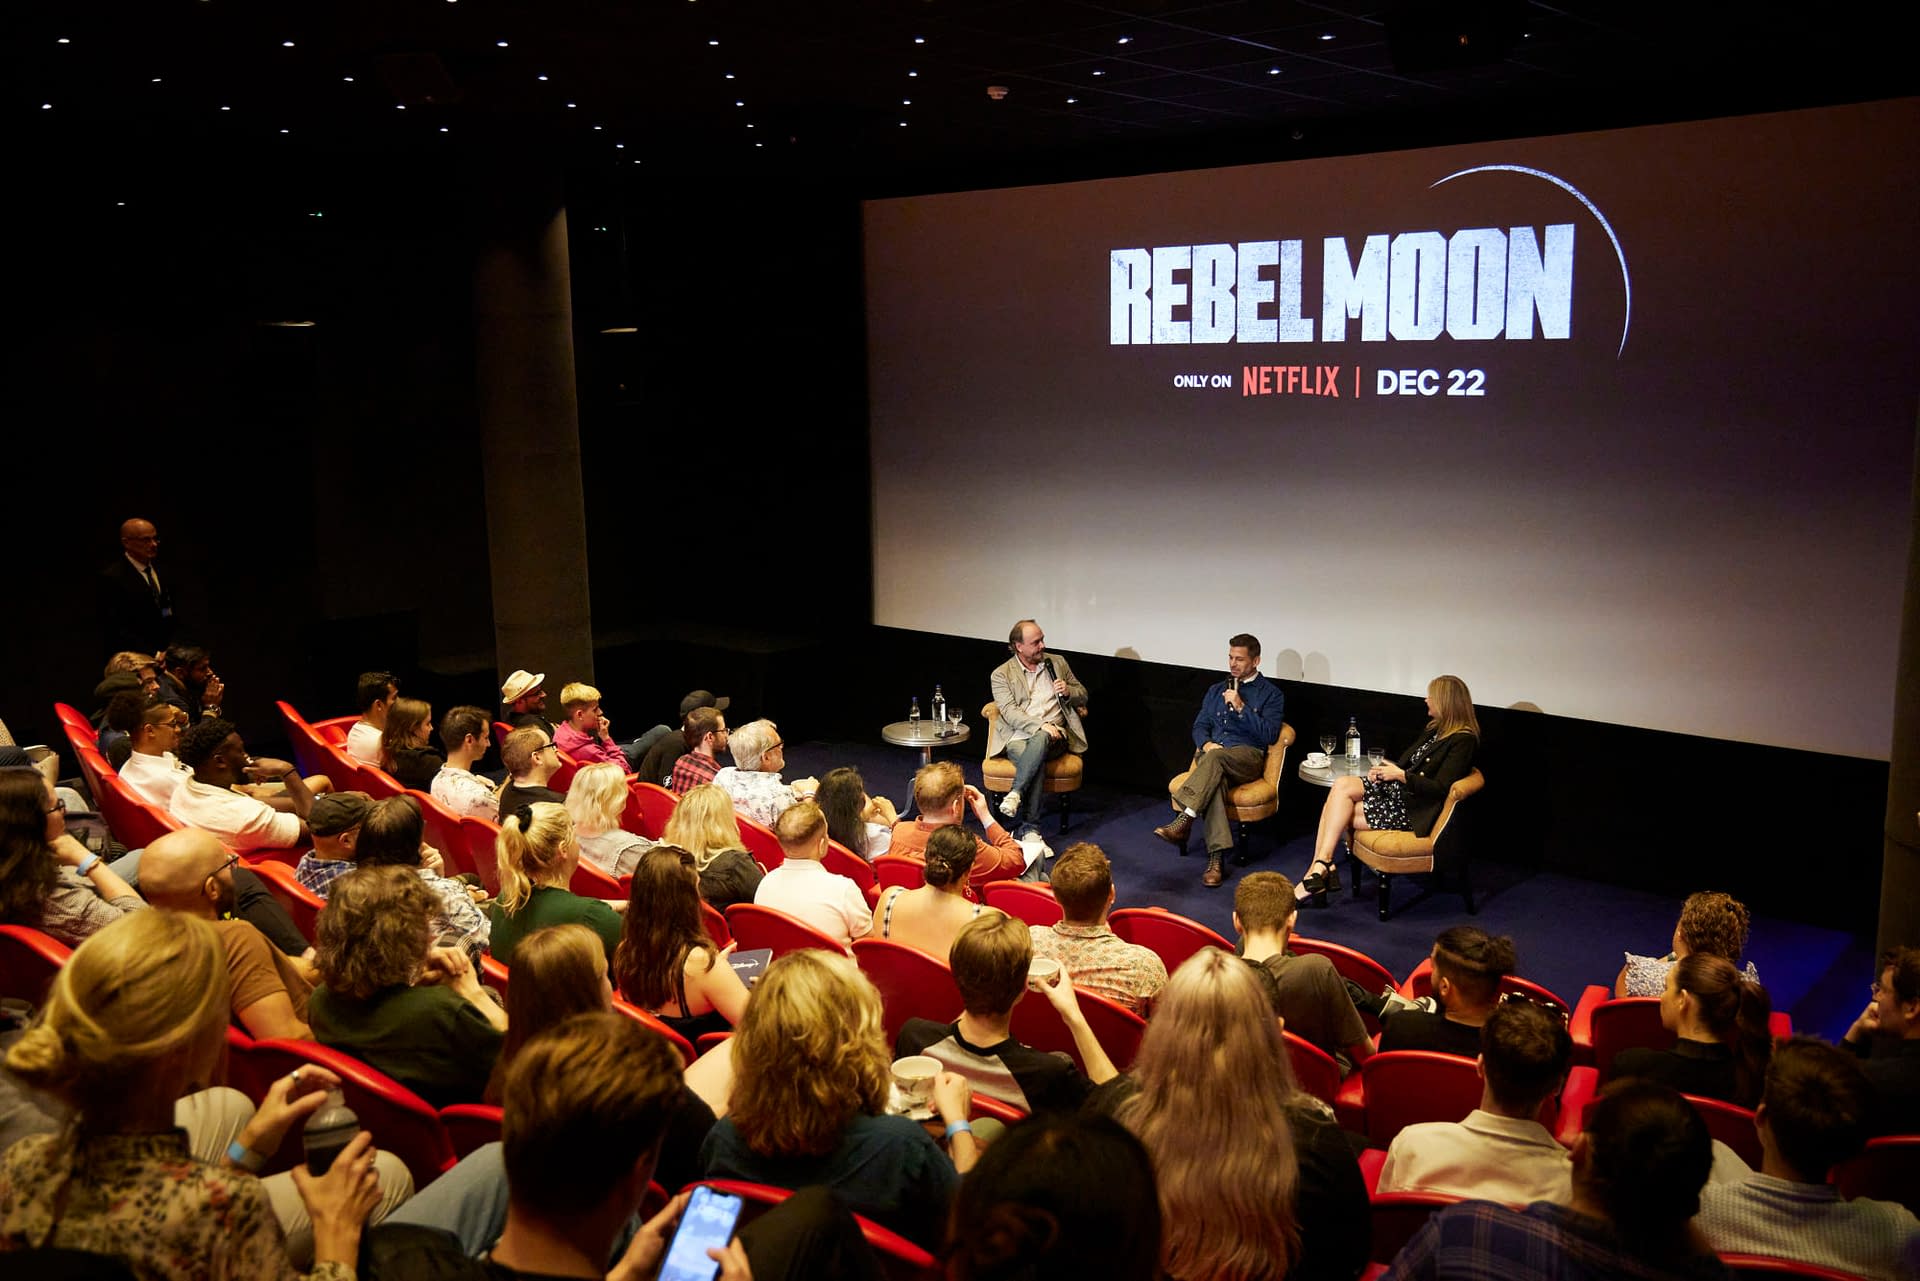 Zack Snyder is back on Netflix with his new film Rebel Moon, but what is  it? - ABC News